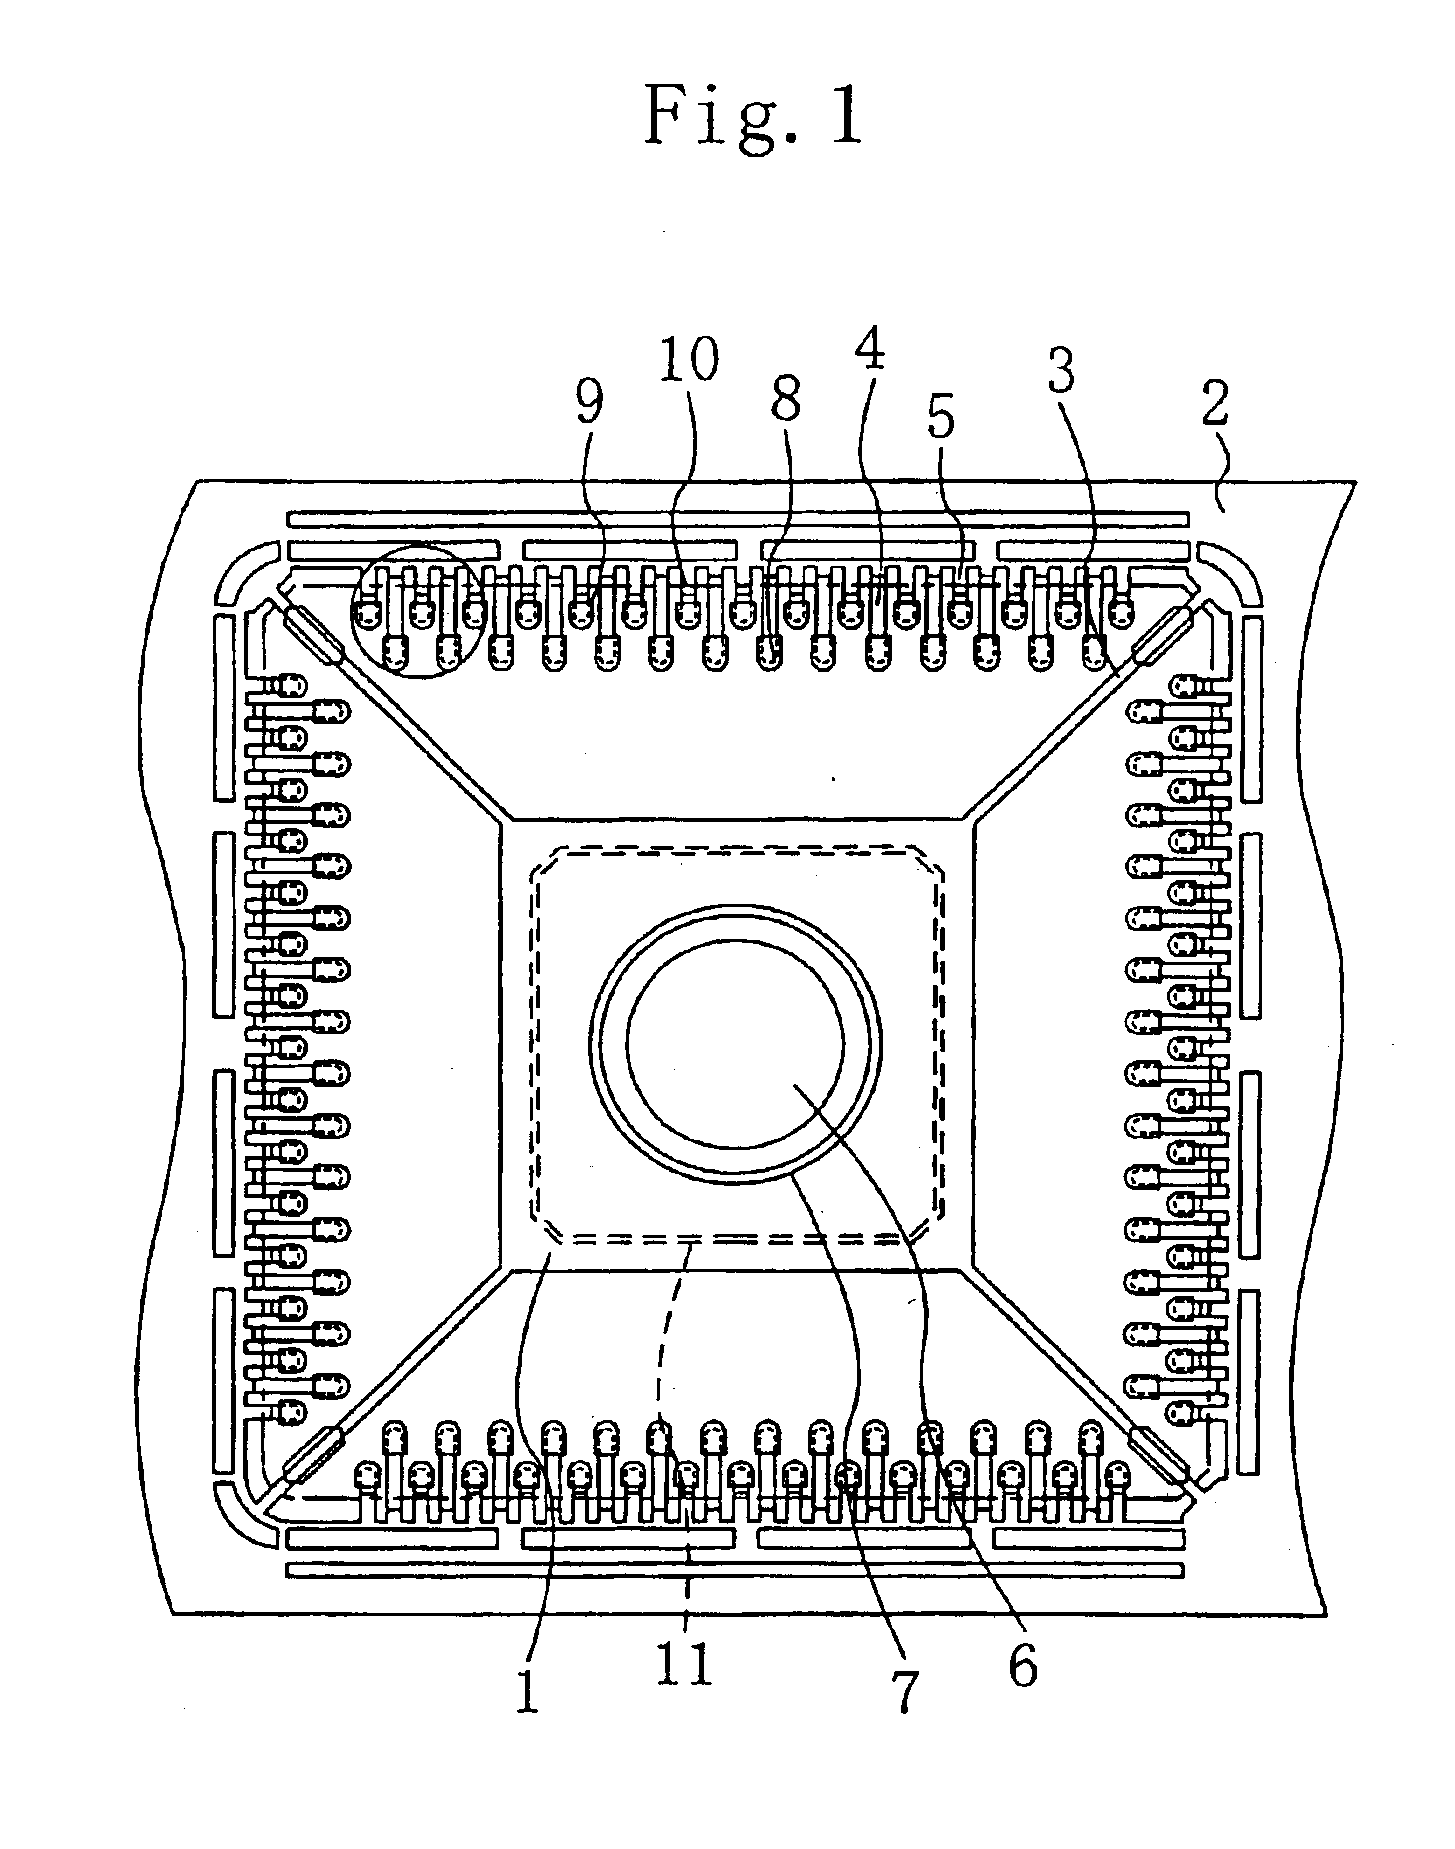 Resin-molded semiconductor device